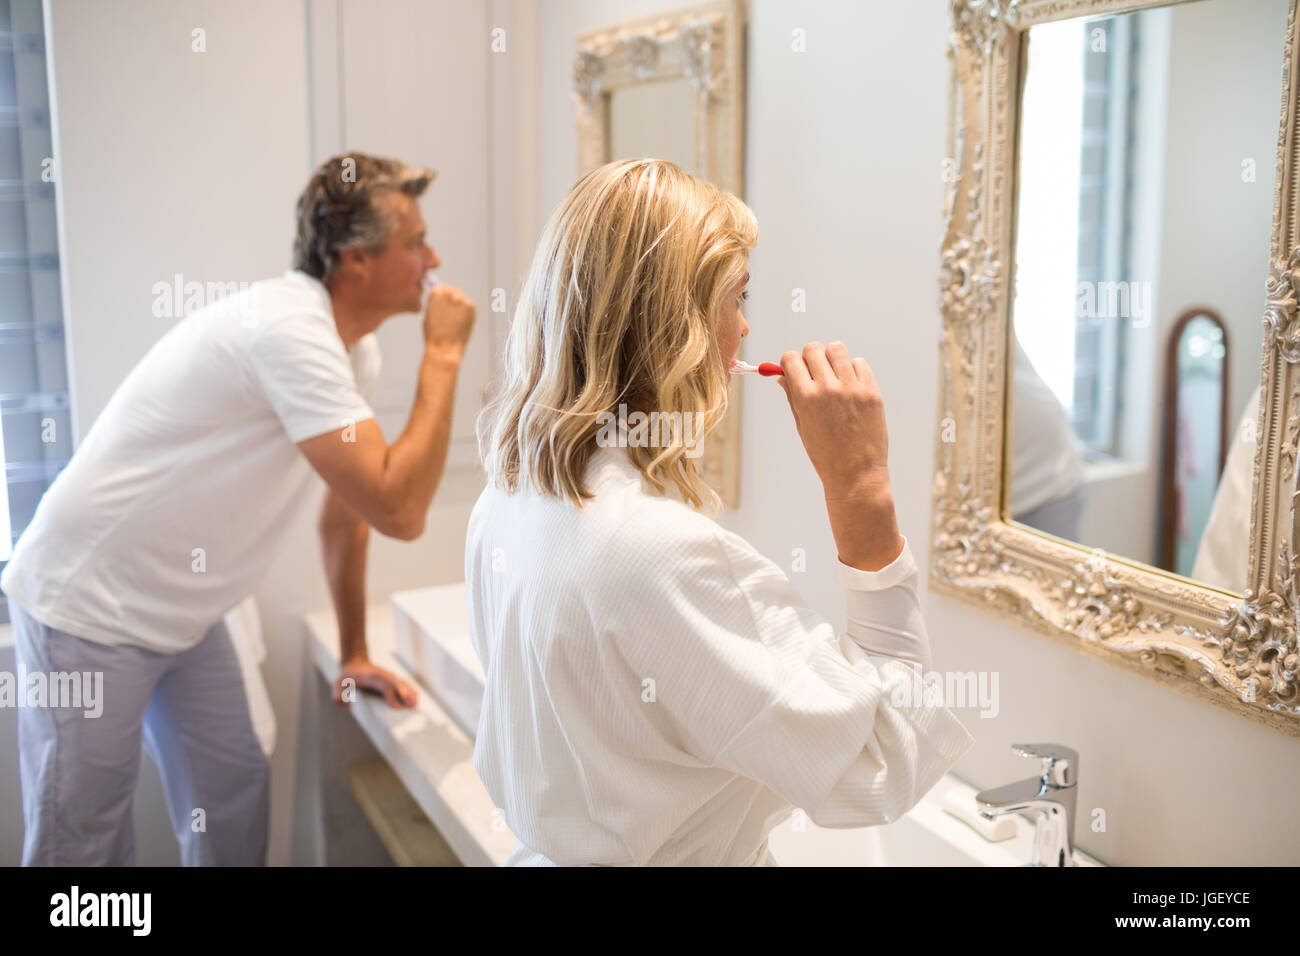 Couple brushing teeth in front of mirror at bathroom Stock Photo